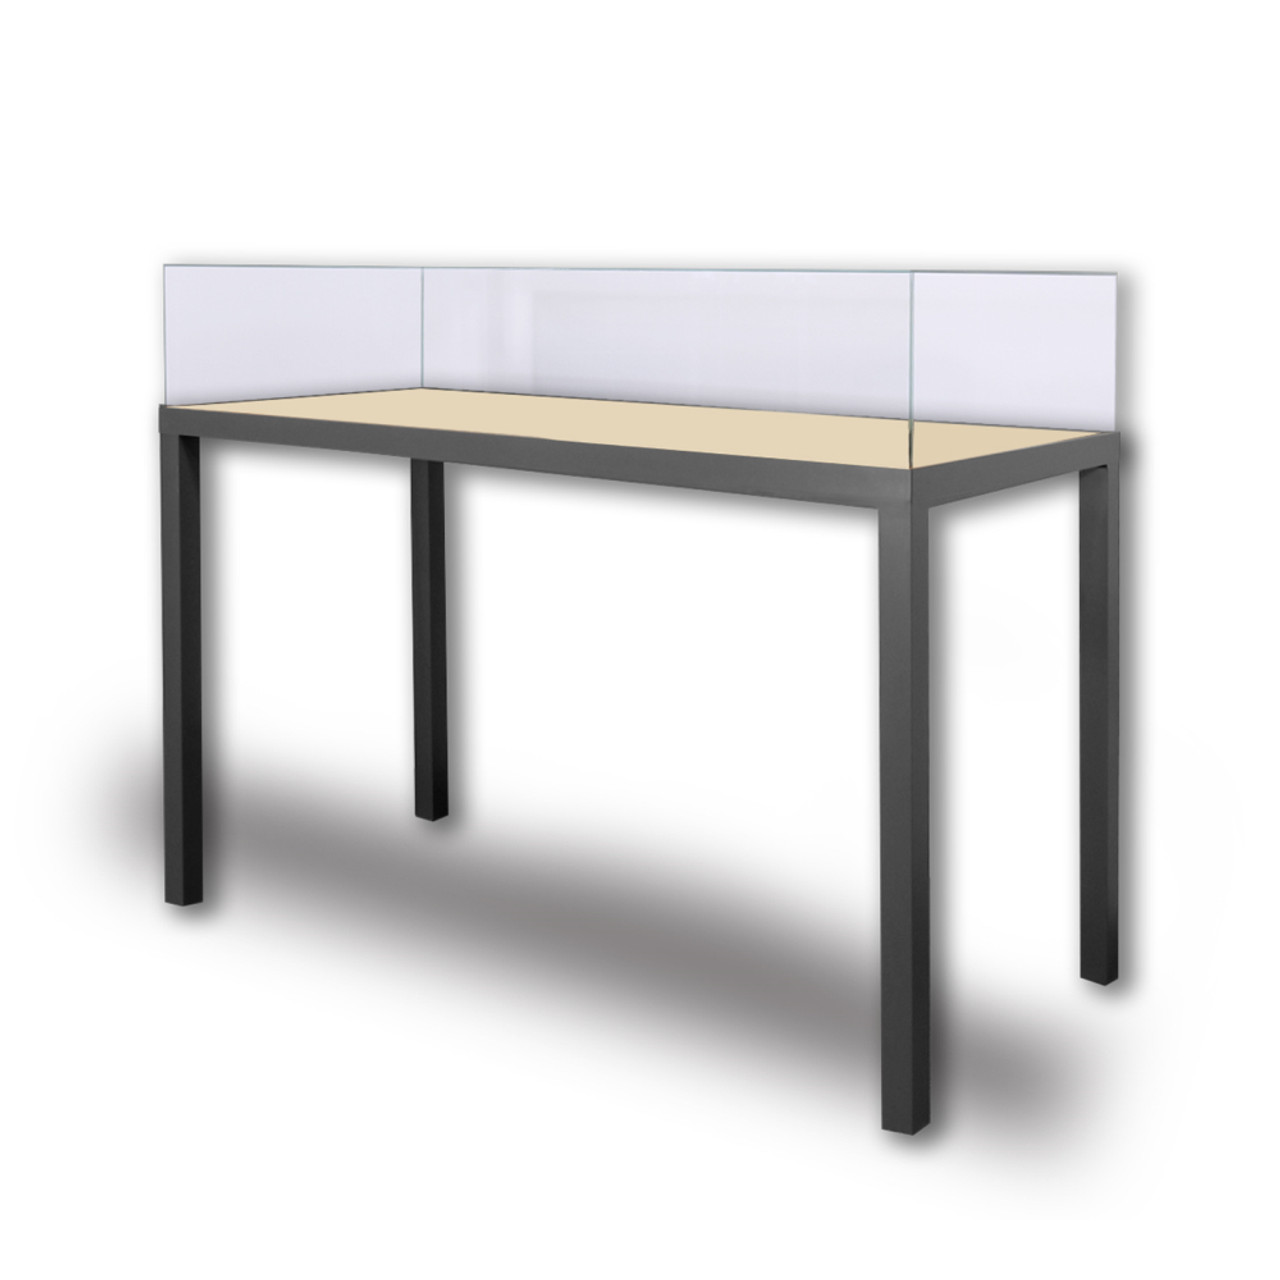 Leg Lift-Off Panel Table Painted Case with Vitrine